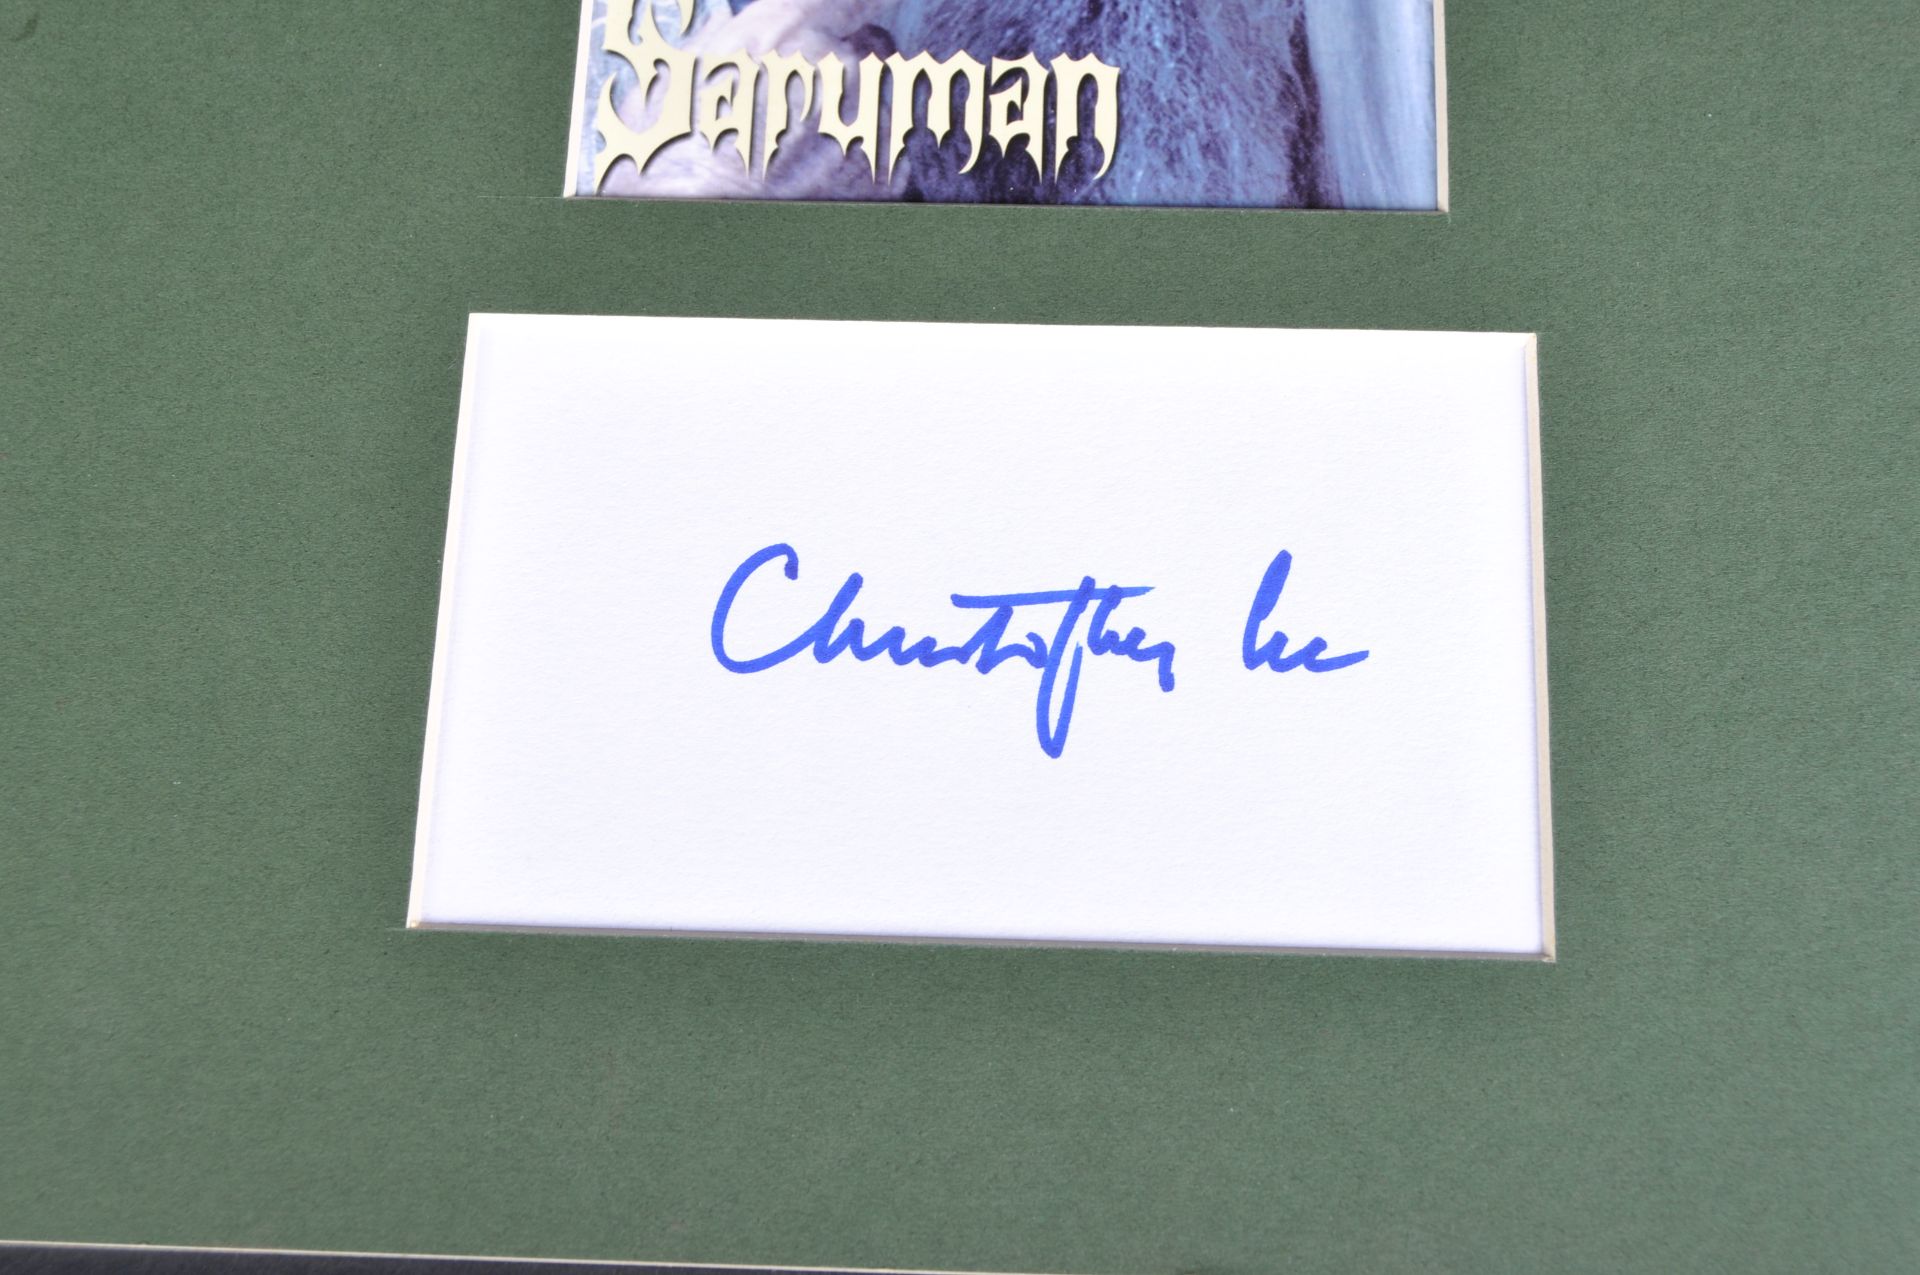 LORD OF THE RINGS - SIR CHRISTOPHER LEE - PRESENTATION AUTOGRAPH - Image 2 of 2